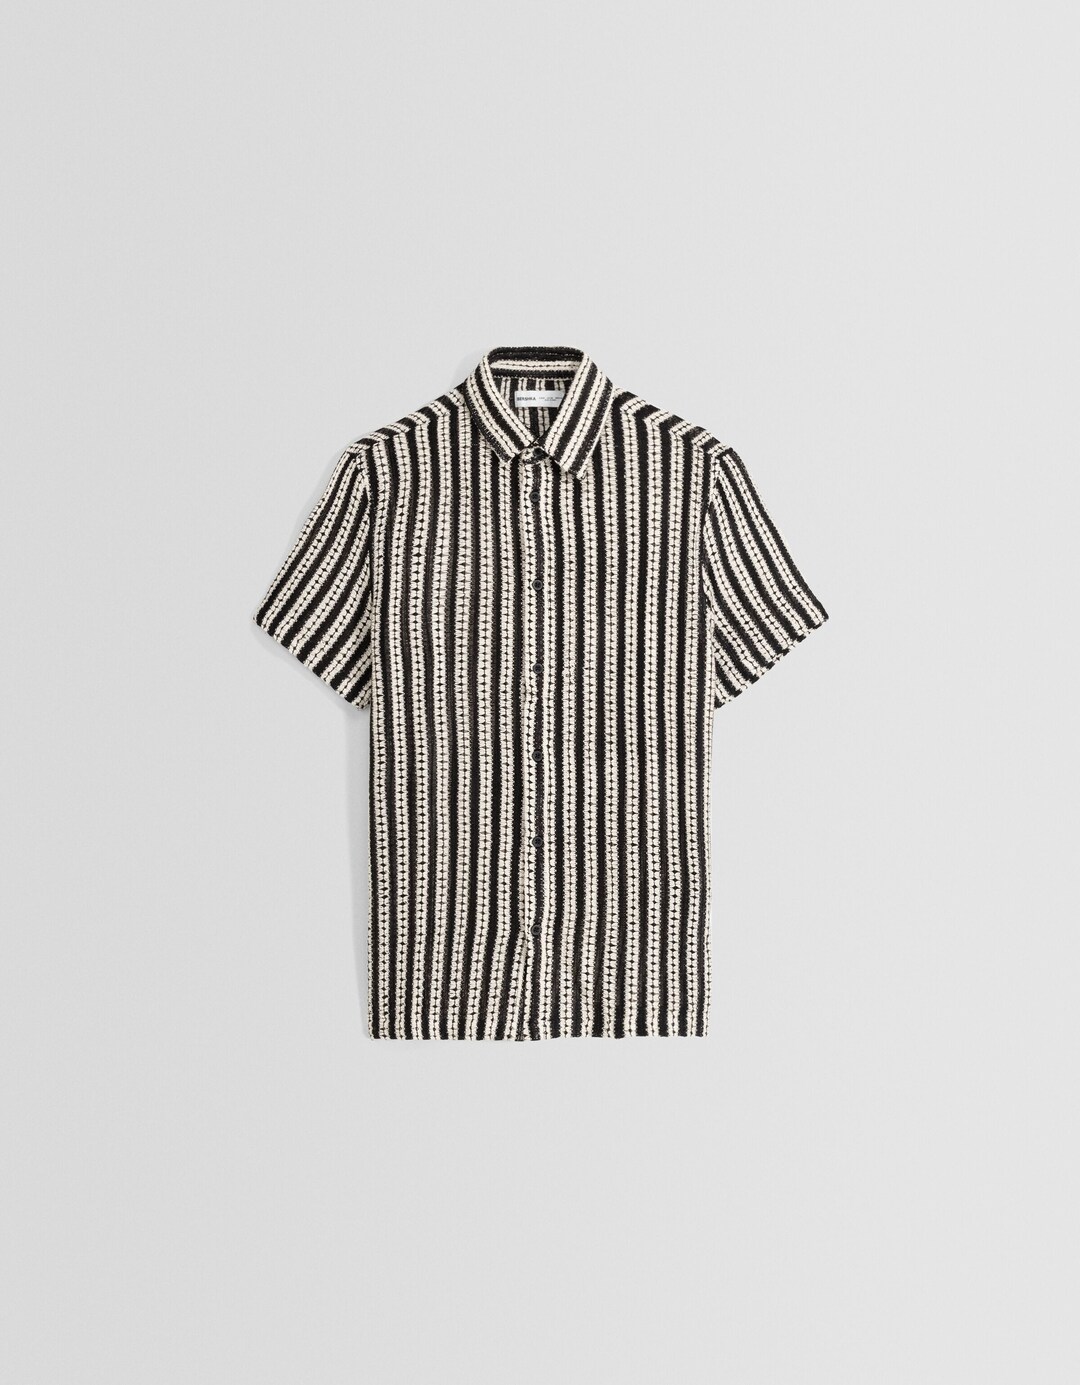 Open knit striped shirt with short sleeves